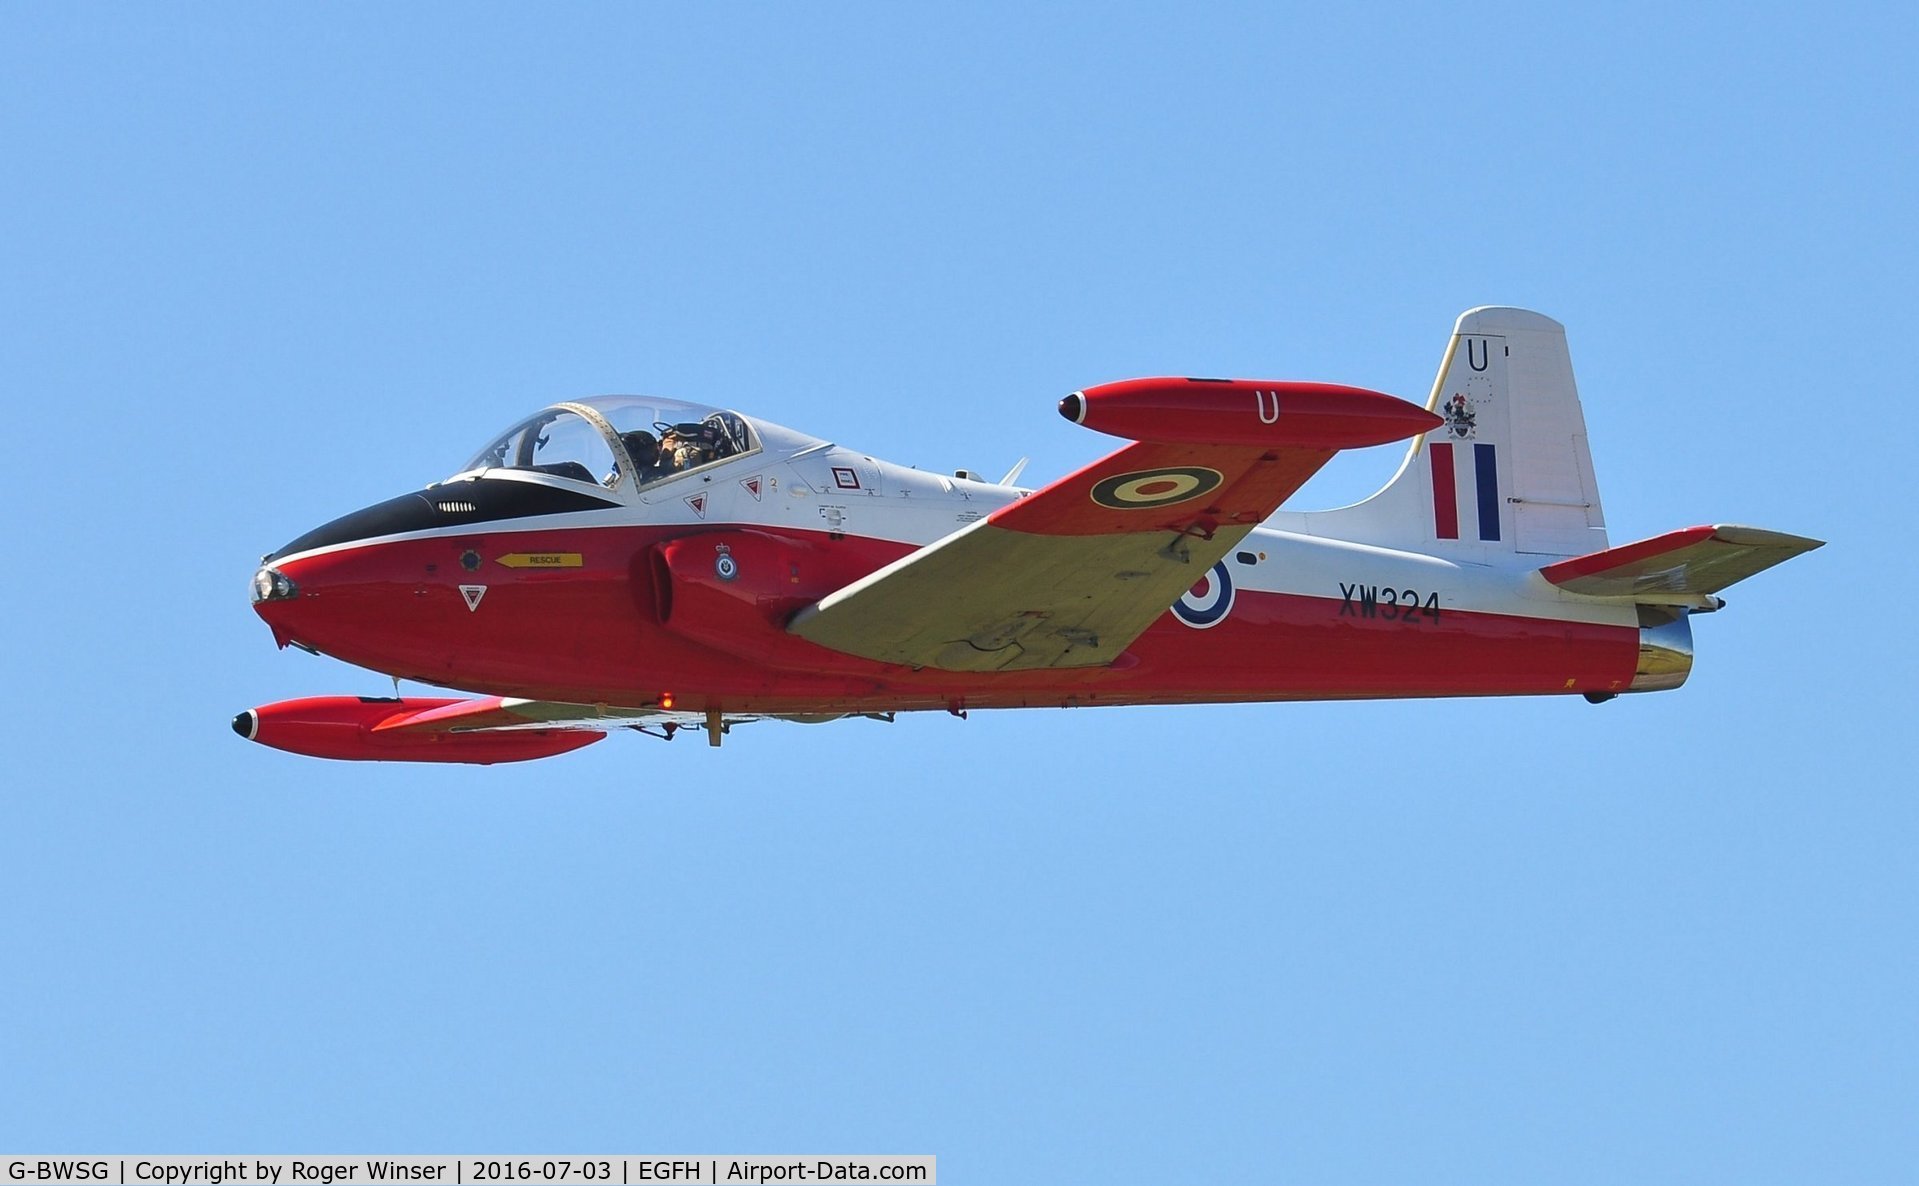 G-BWSG, 1970 BAC 84 Jet Provost T.5 C/N EEP/JP/988, Low pass over Runway 22 by visiting JP in 6FTS colour scheme coded U.